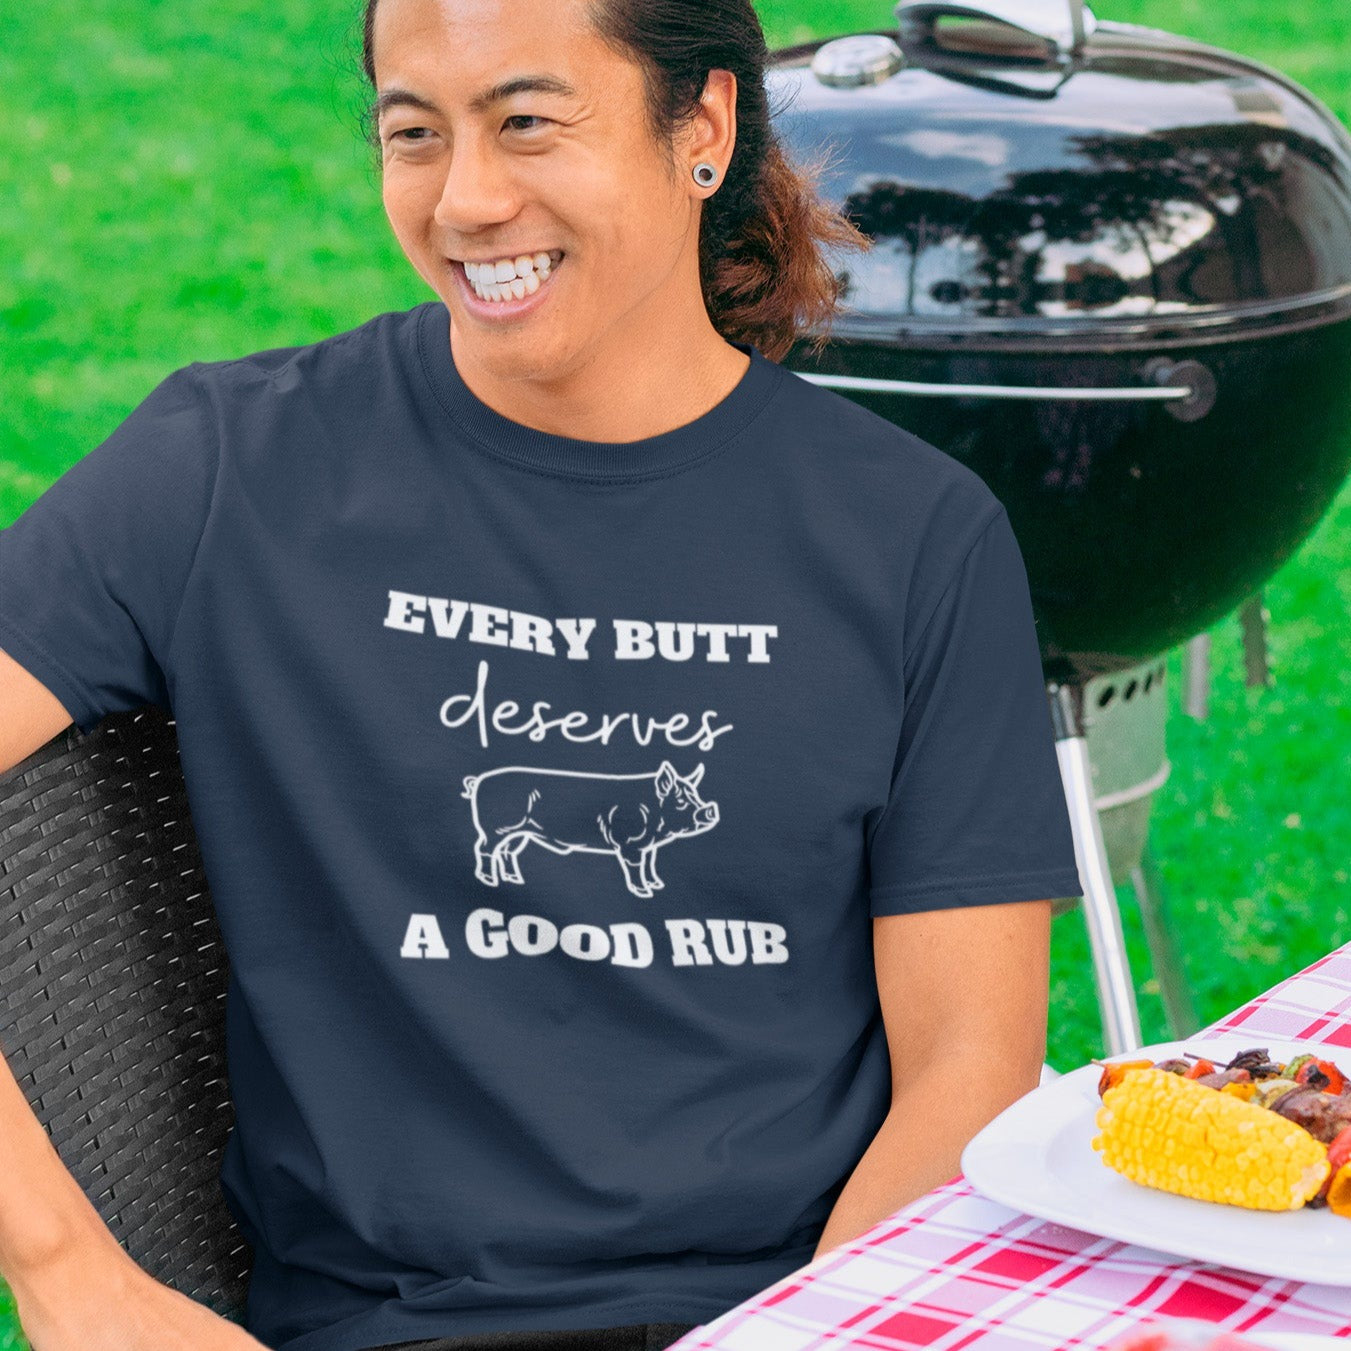 every-butt-deserves-a-good-rub-navy-blue-t-shirt-with-pig-graphic-barbeque-cooking-unisex-crewneck-tee-mockup-featuring-a-smiling-man-by-a-grill-at-a-bbq-party